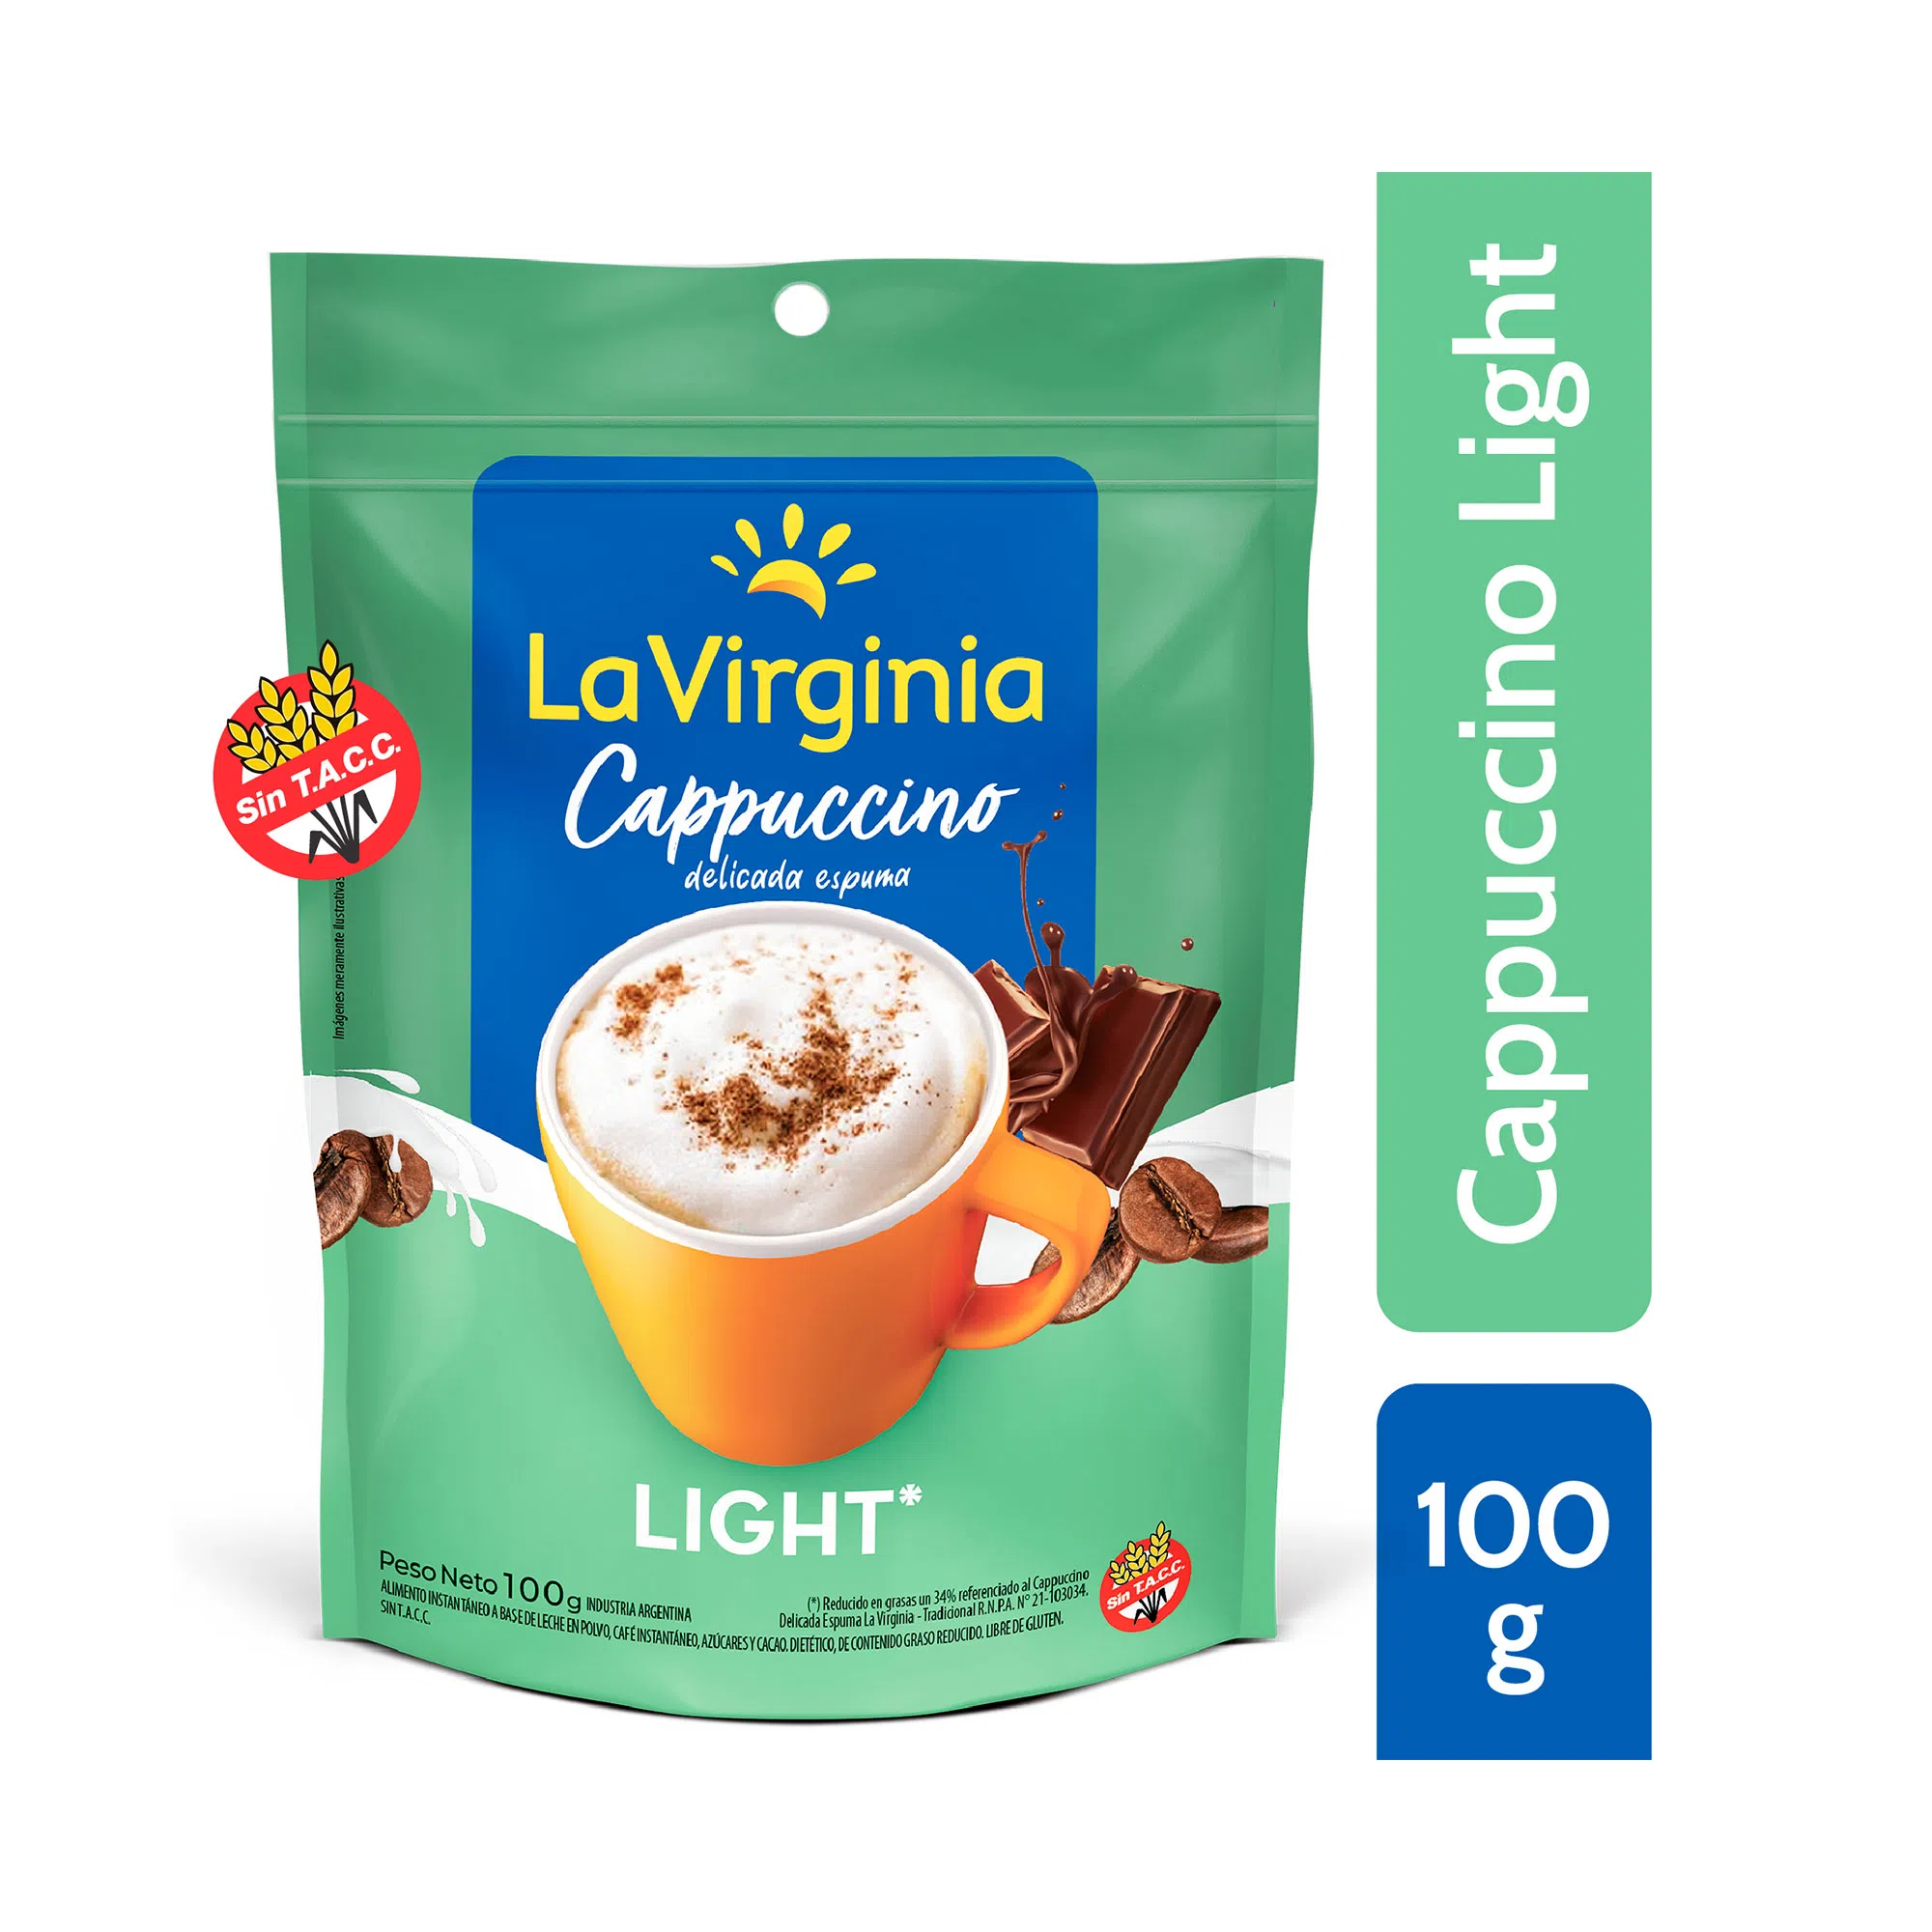 https://d3340tyzmtlo4u.cloudfront.net/users/864/images/detailed/14/La_Virginia_Cappuccino_Instant%C3%A1neo_Light,_100_g.webp